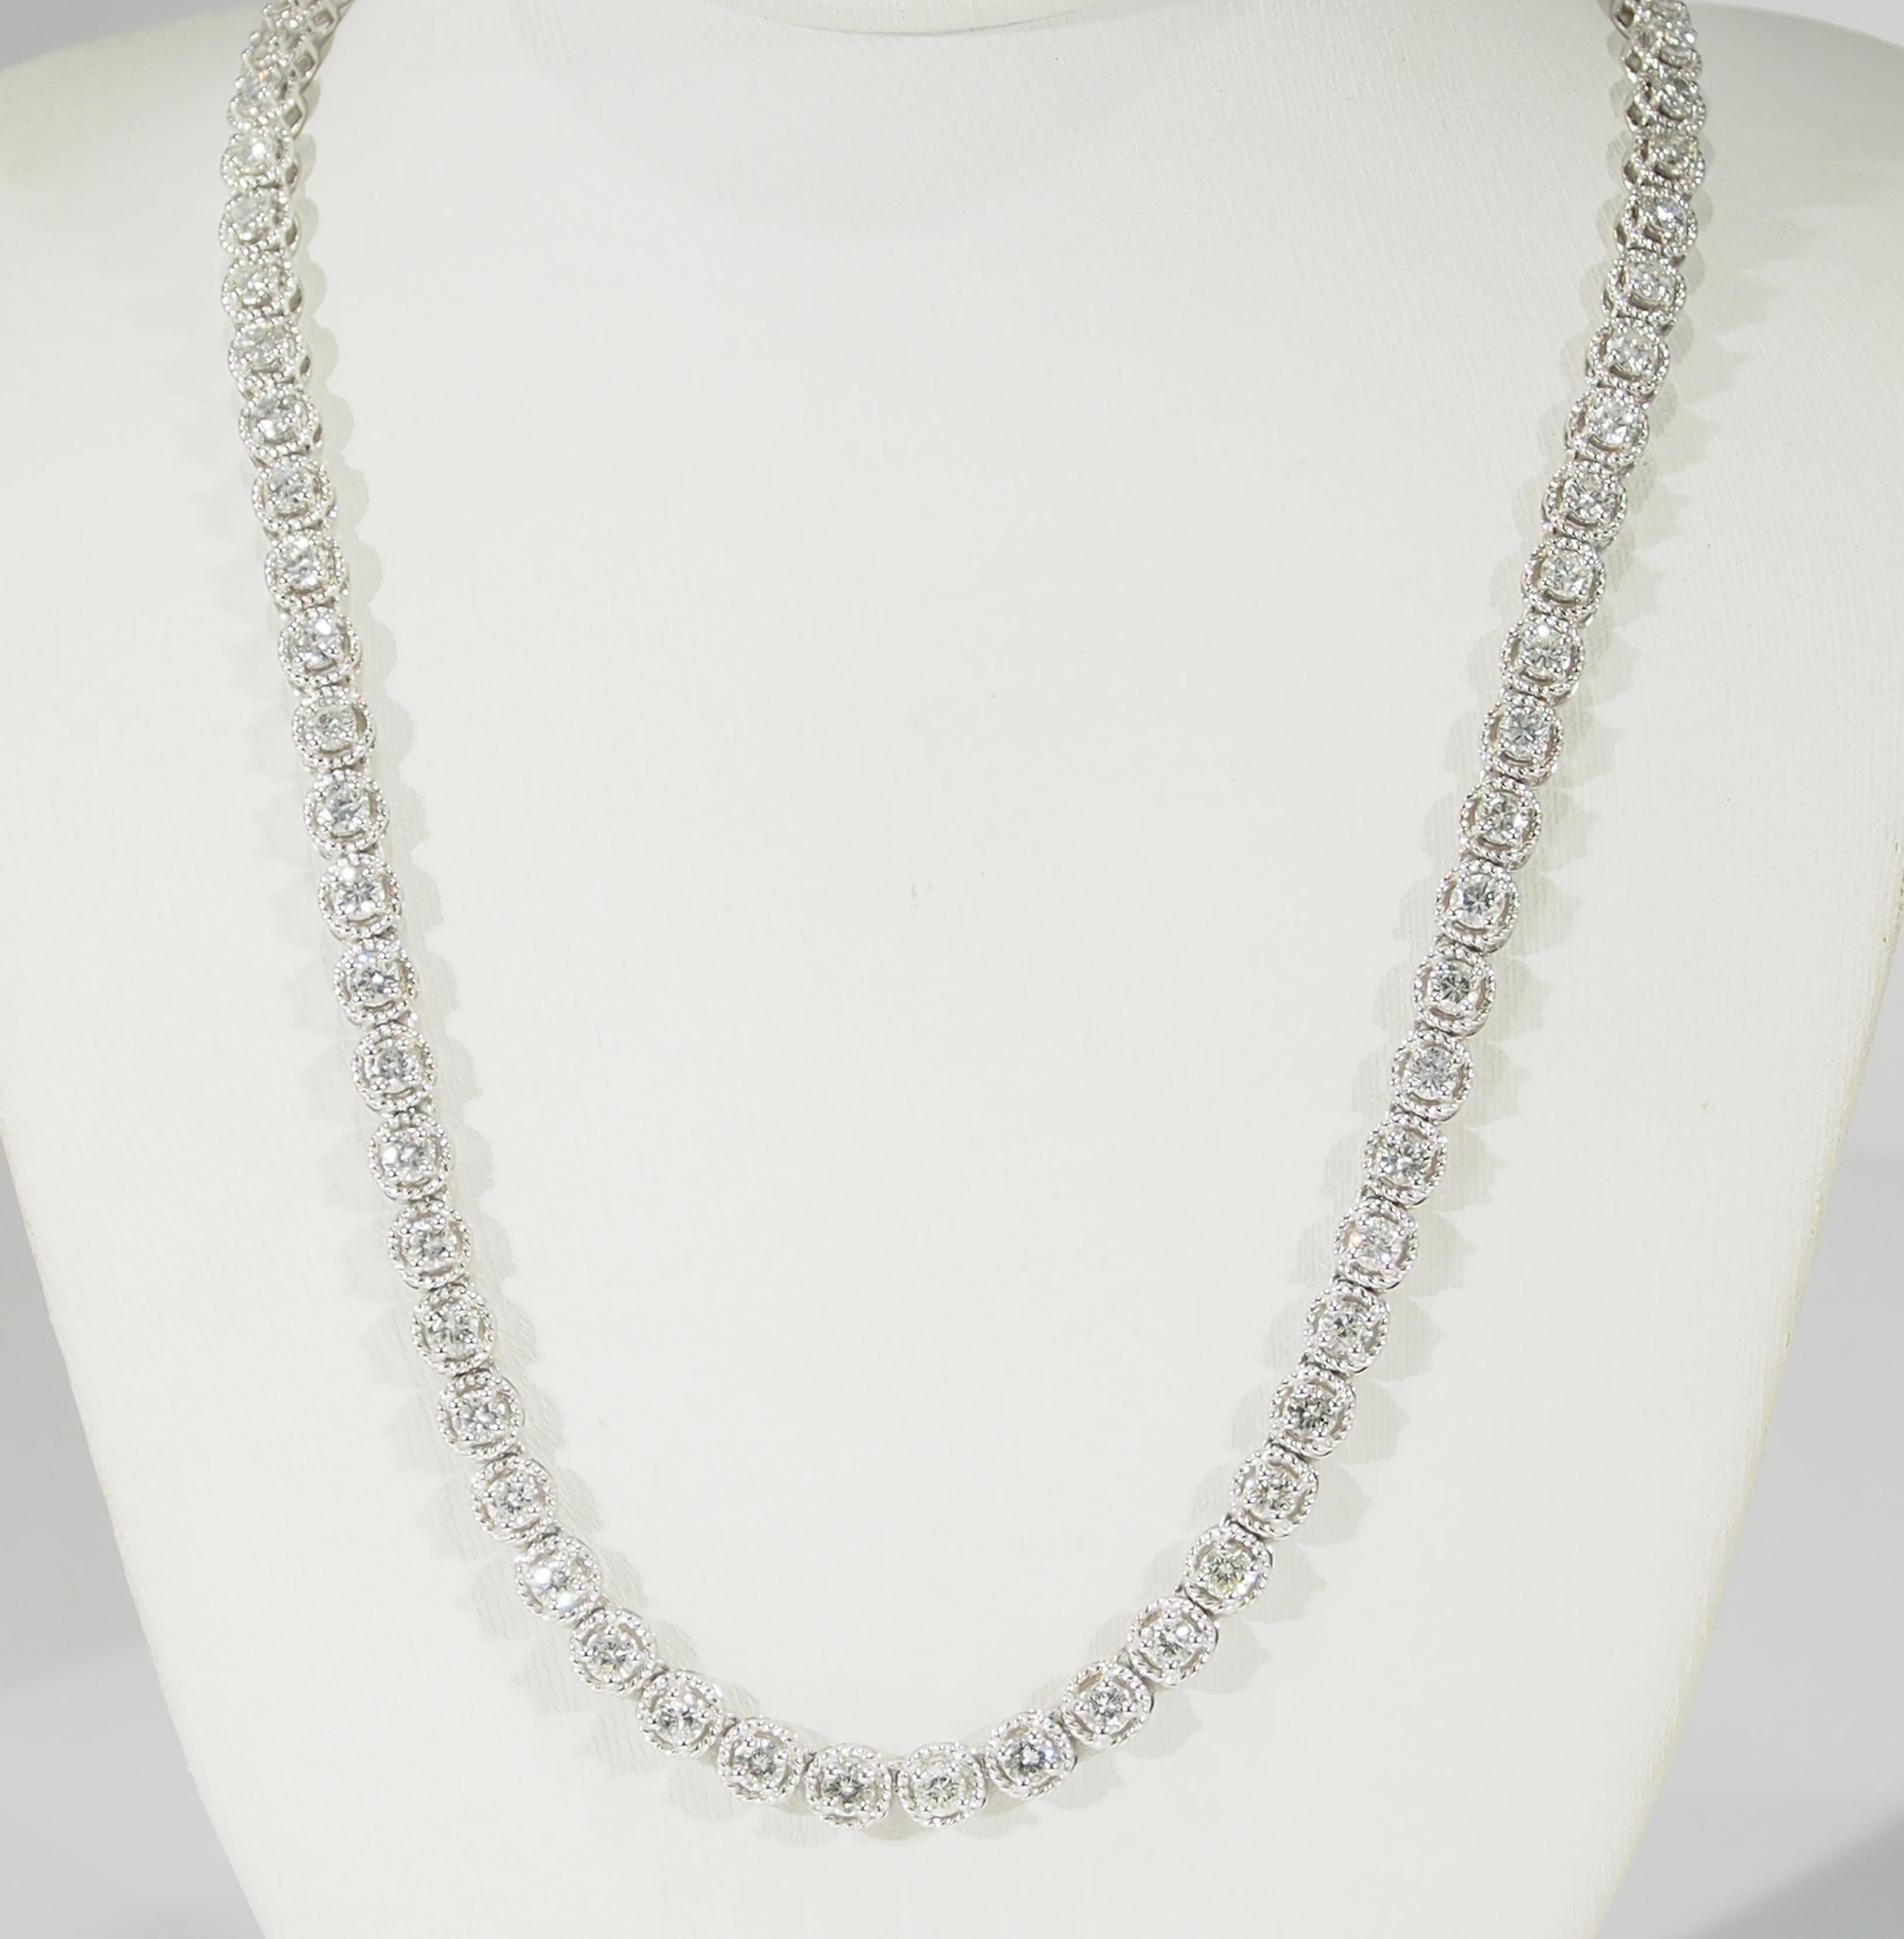 This is a lustrous 14K White Gold Tennis Necklace designed with Rope-Like settings encircling the (88) Round Brilliant Cut Diamonds, approximately 7.09ctw, G-H in Color, VS-SI3 in Clarity allowing this Necklace to Sparkle in a 17 inch length. An